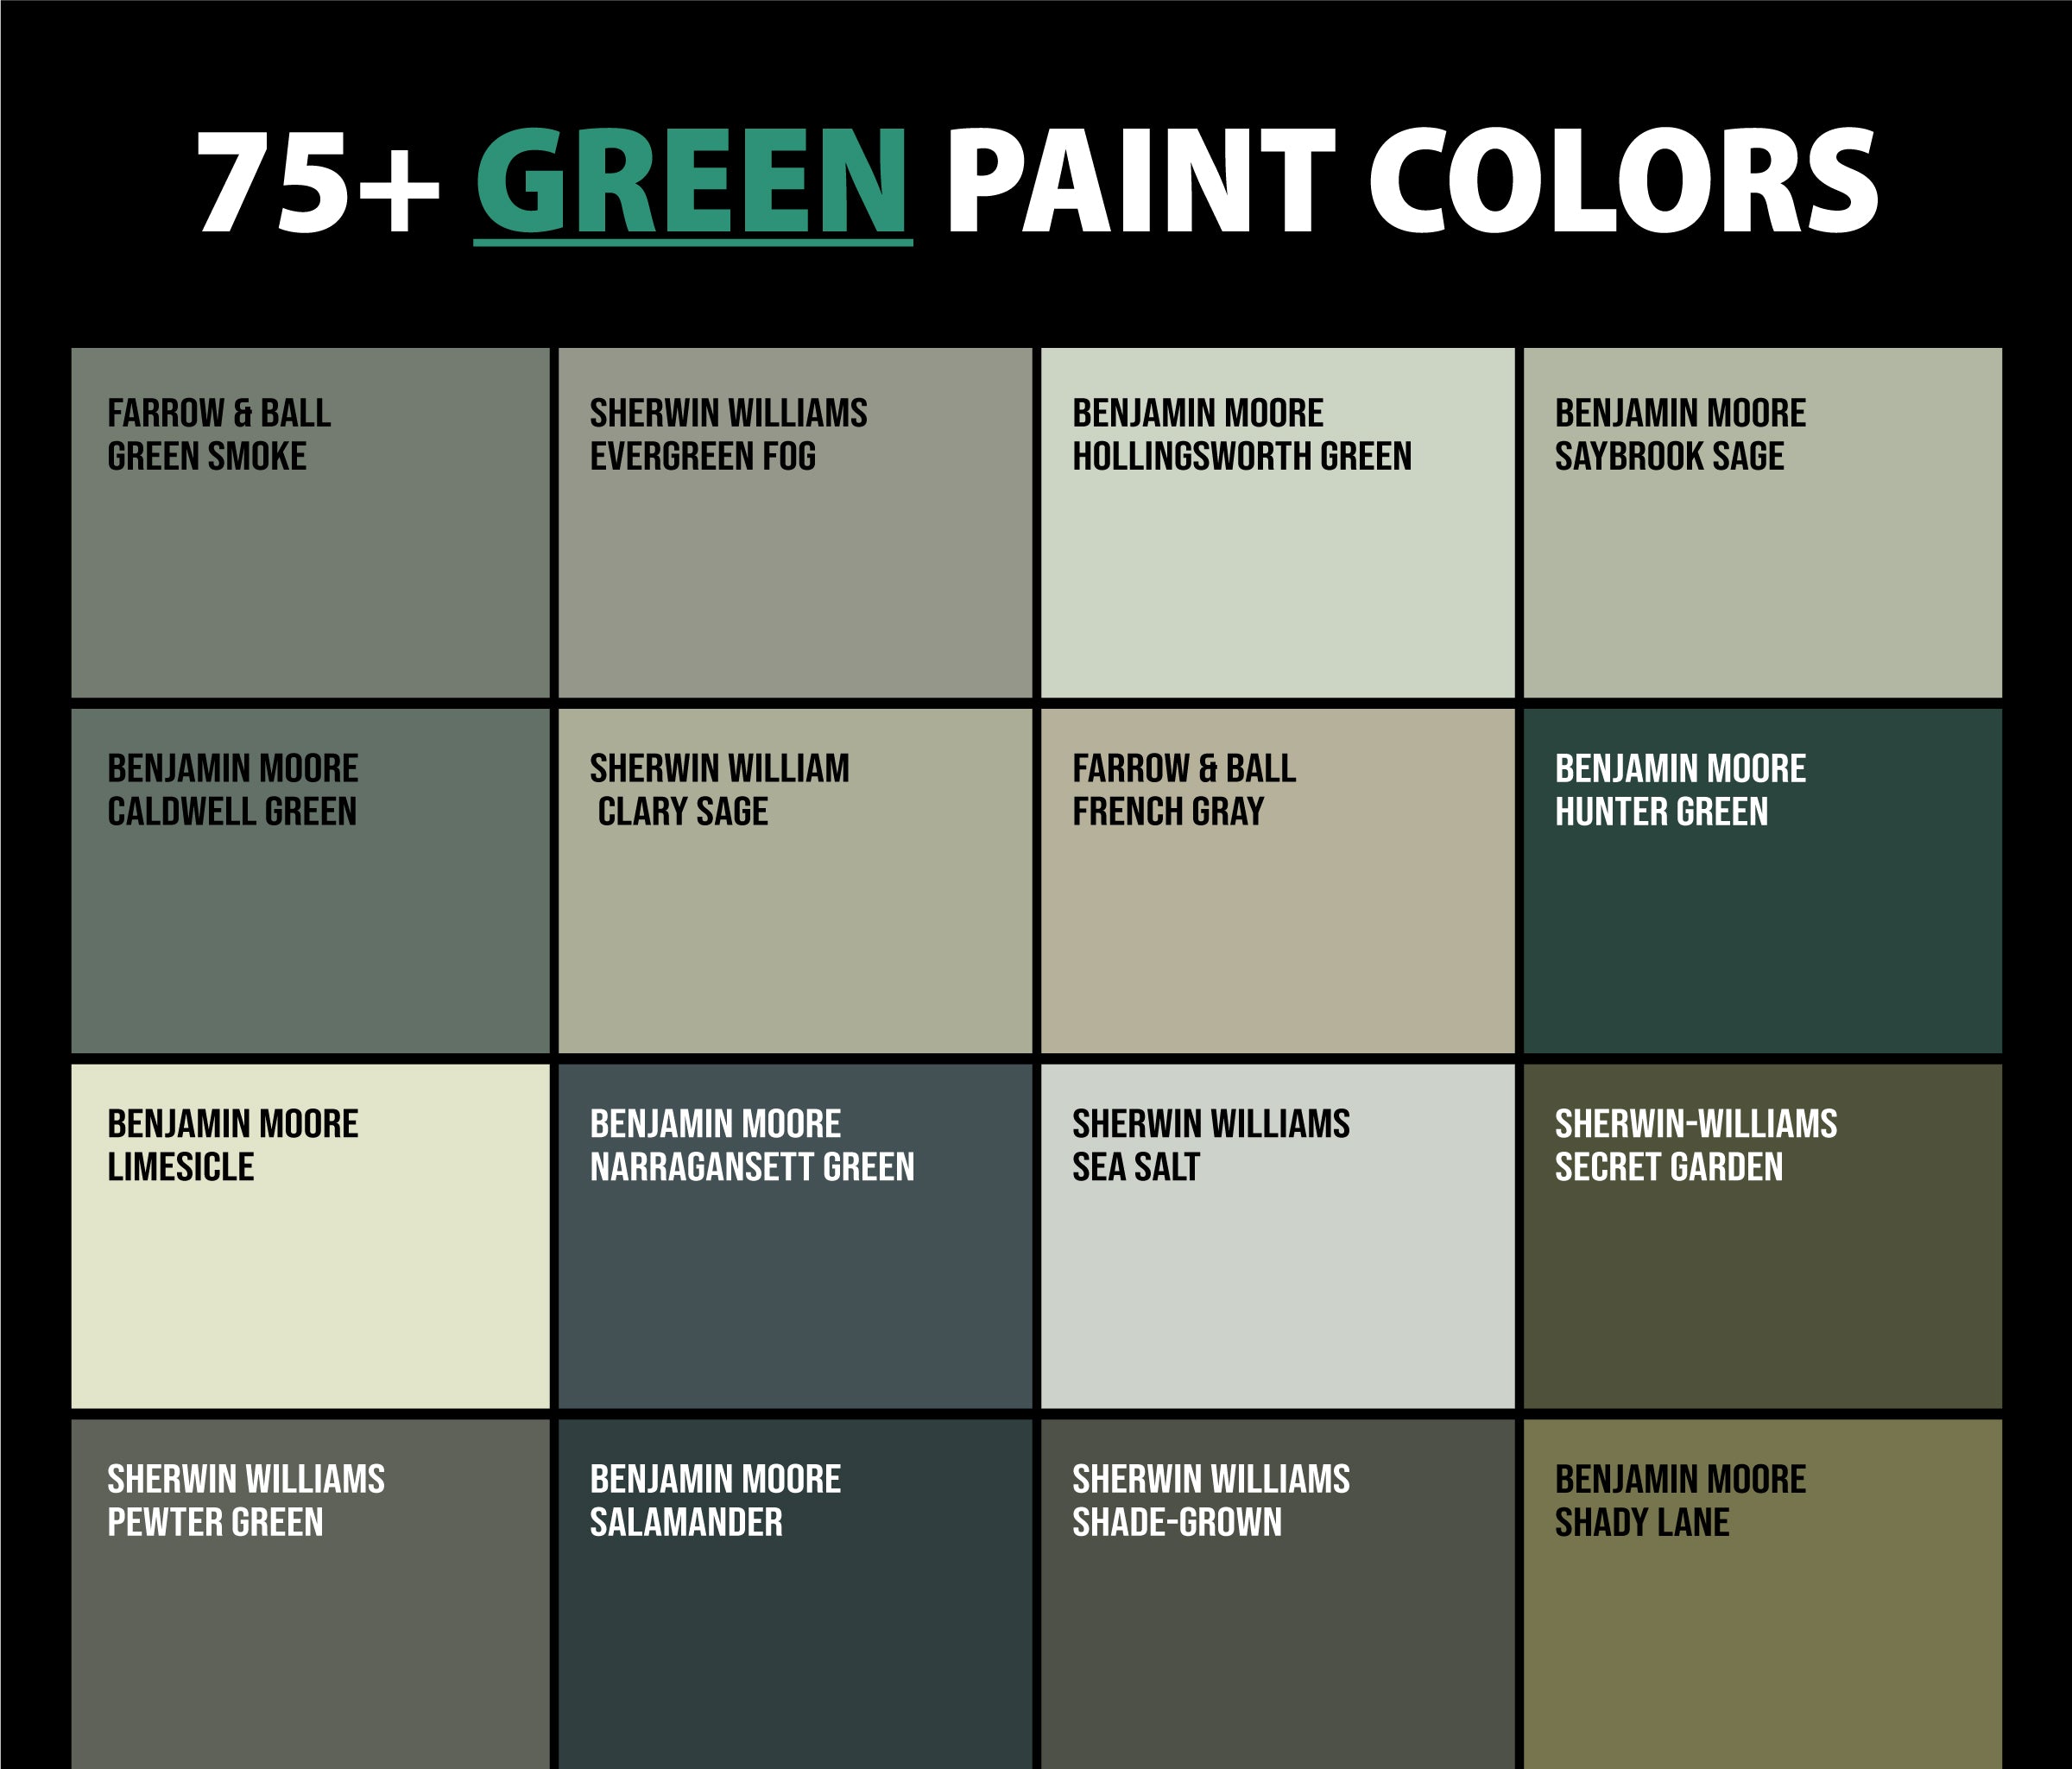 Shades-of-Green-Paint-Colors-chart-with-names-and-brands-sherwin-williams-benjamin-moore-with-dark-bg